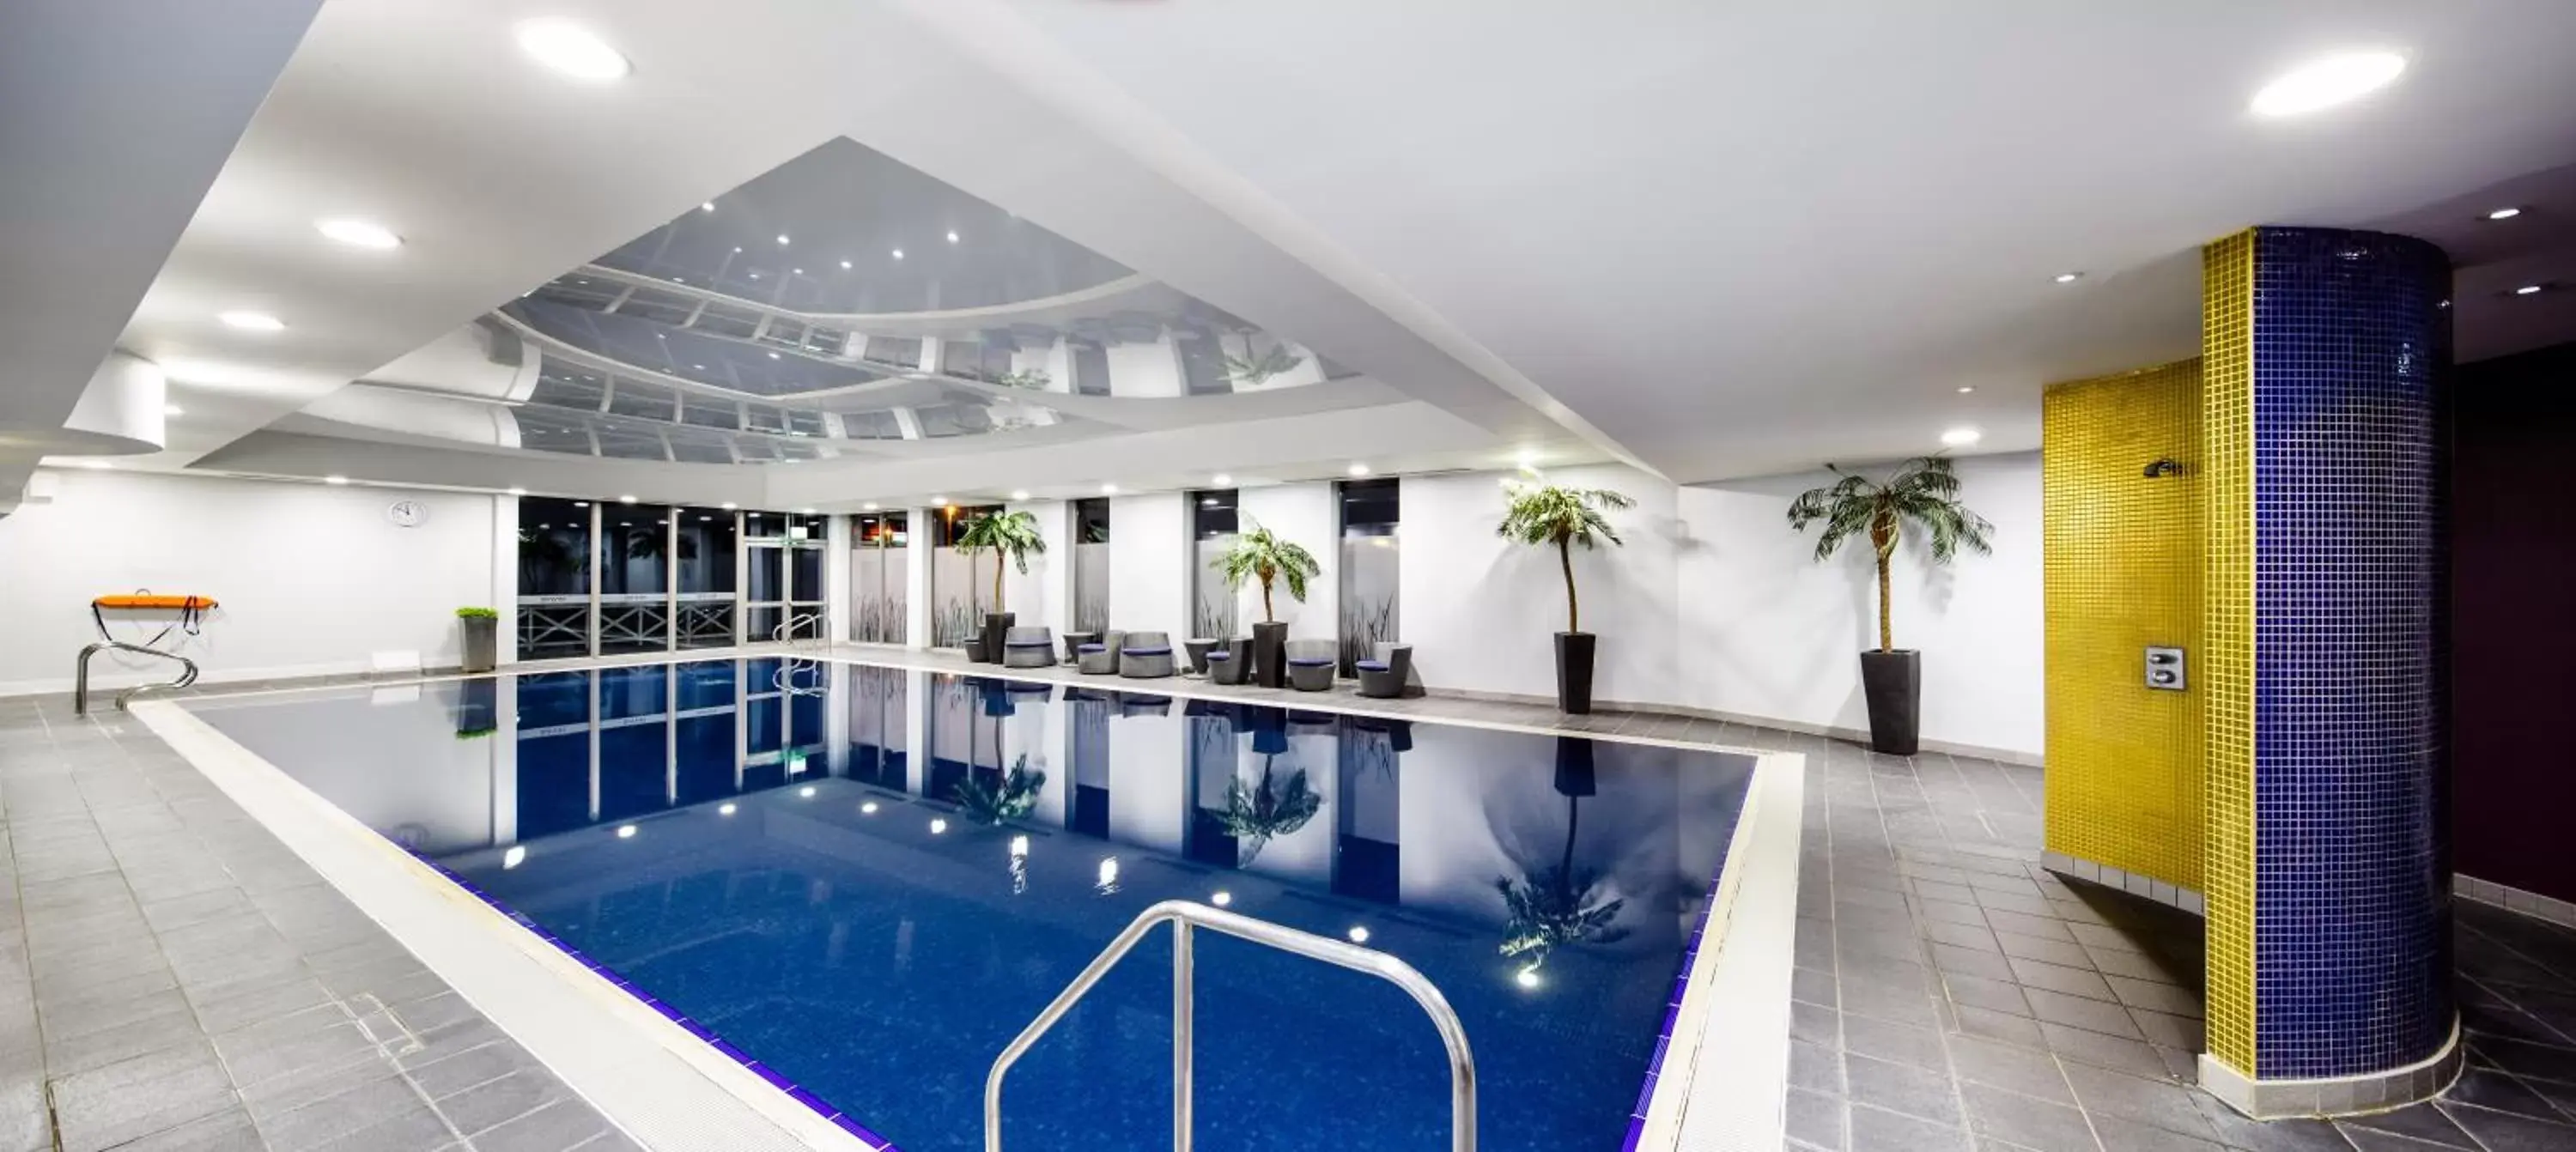 Swimming Pool in Crowne Plaza Reading